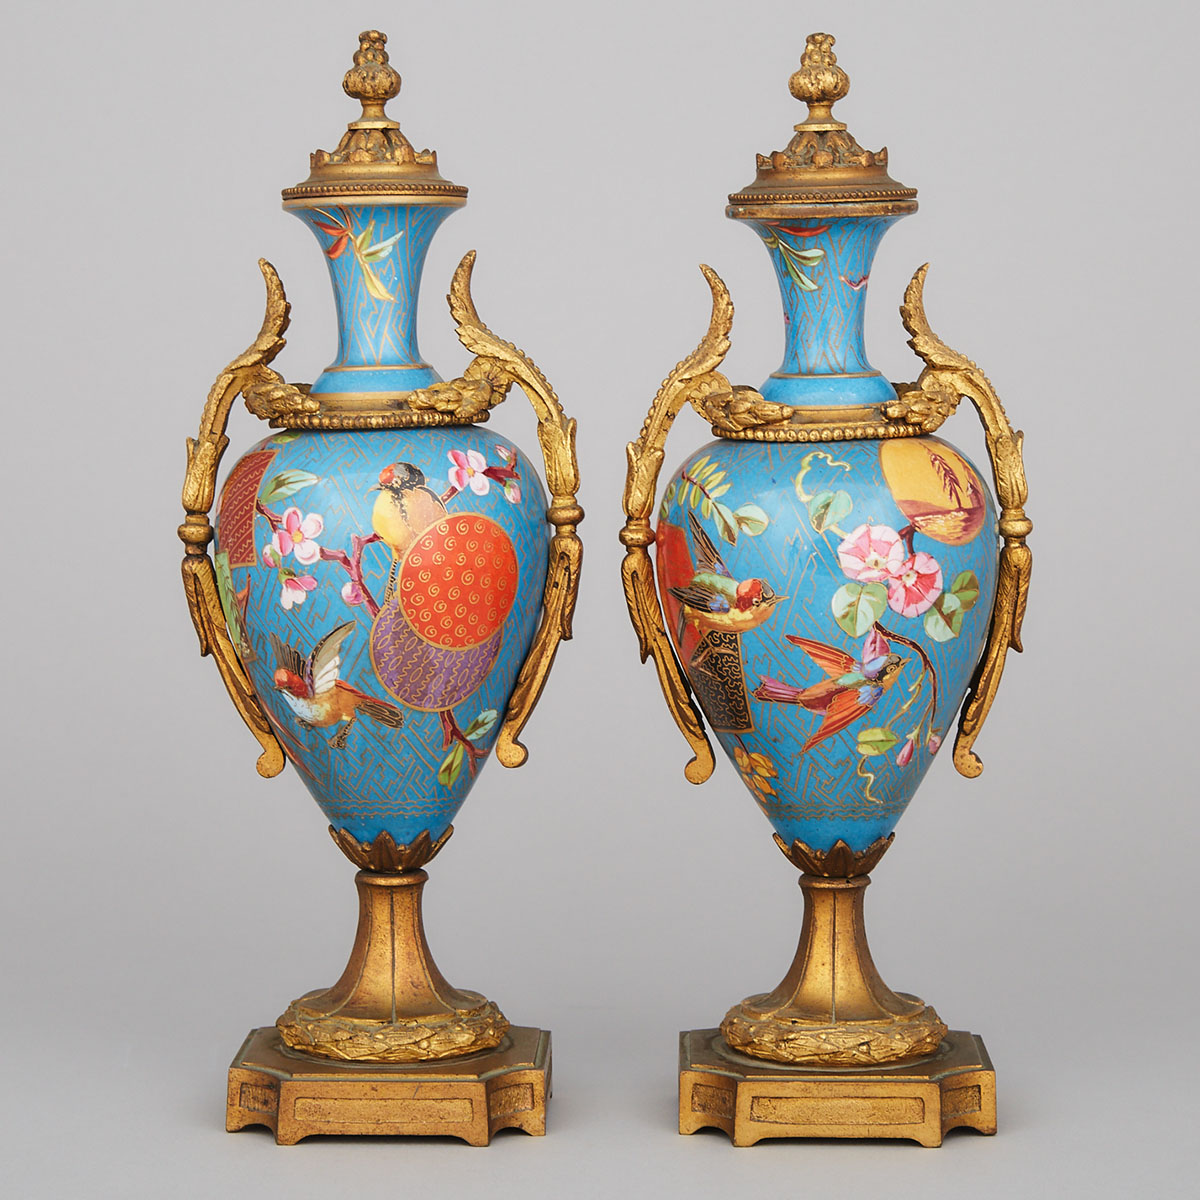 Pair of French Porcelain Ormolu Mounted Covered Vases, late 19th century